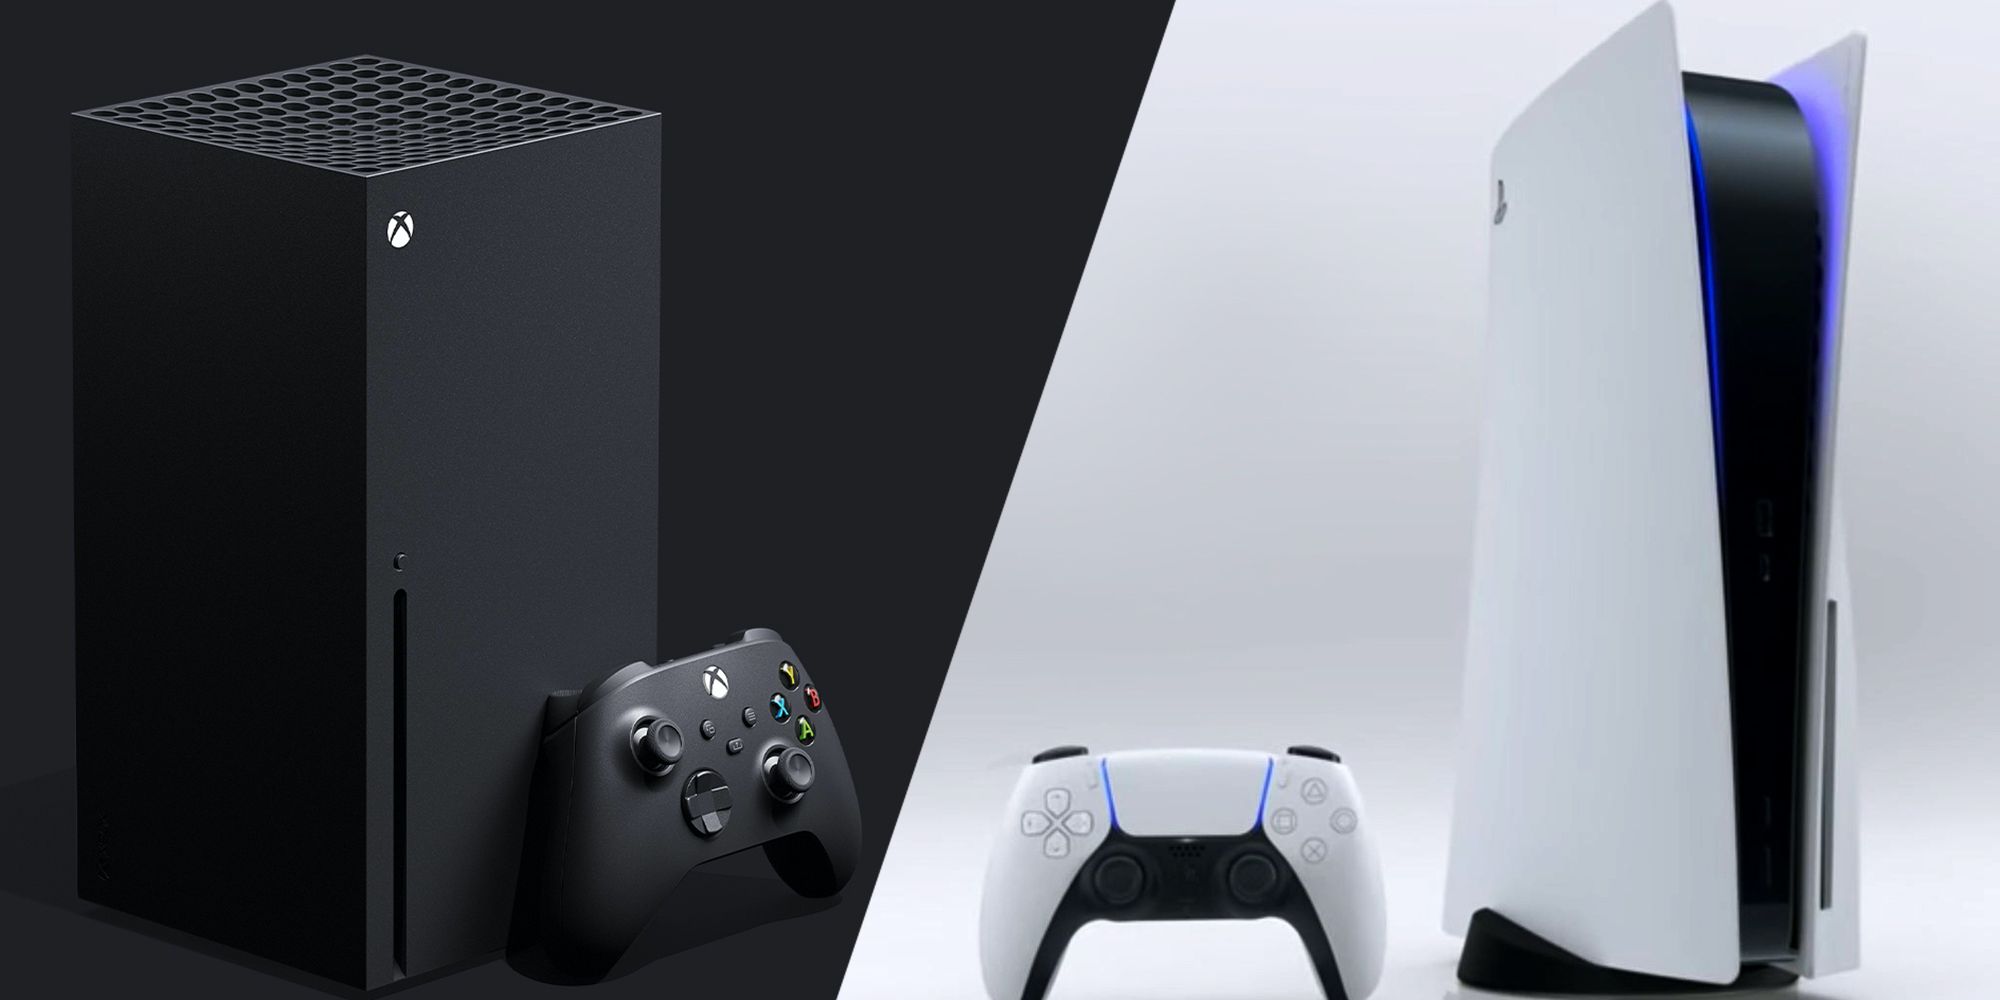 Should You Buy A PlayStation 5 Or Xbox Series X/S?